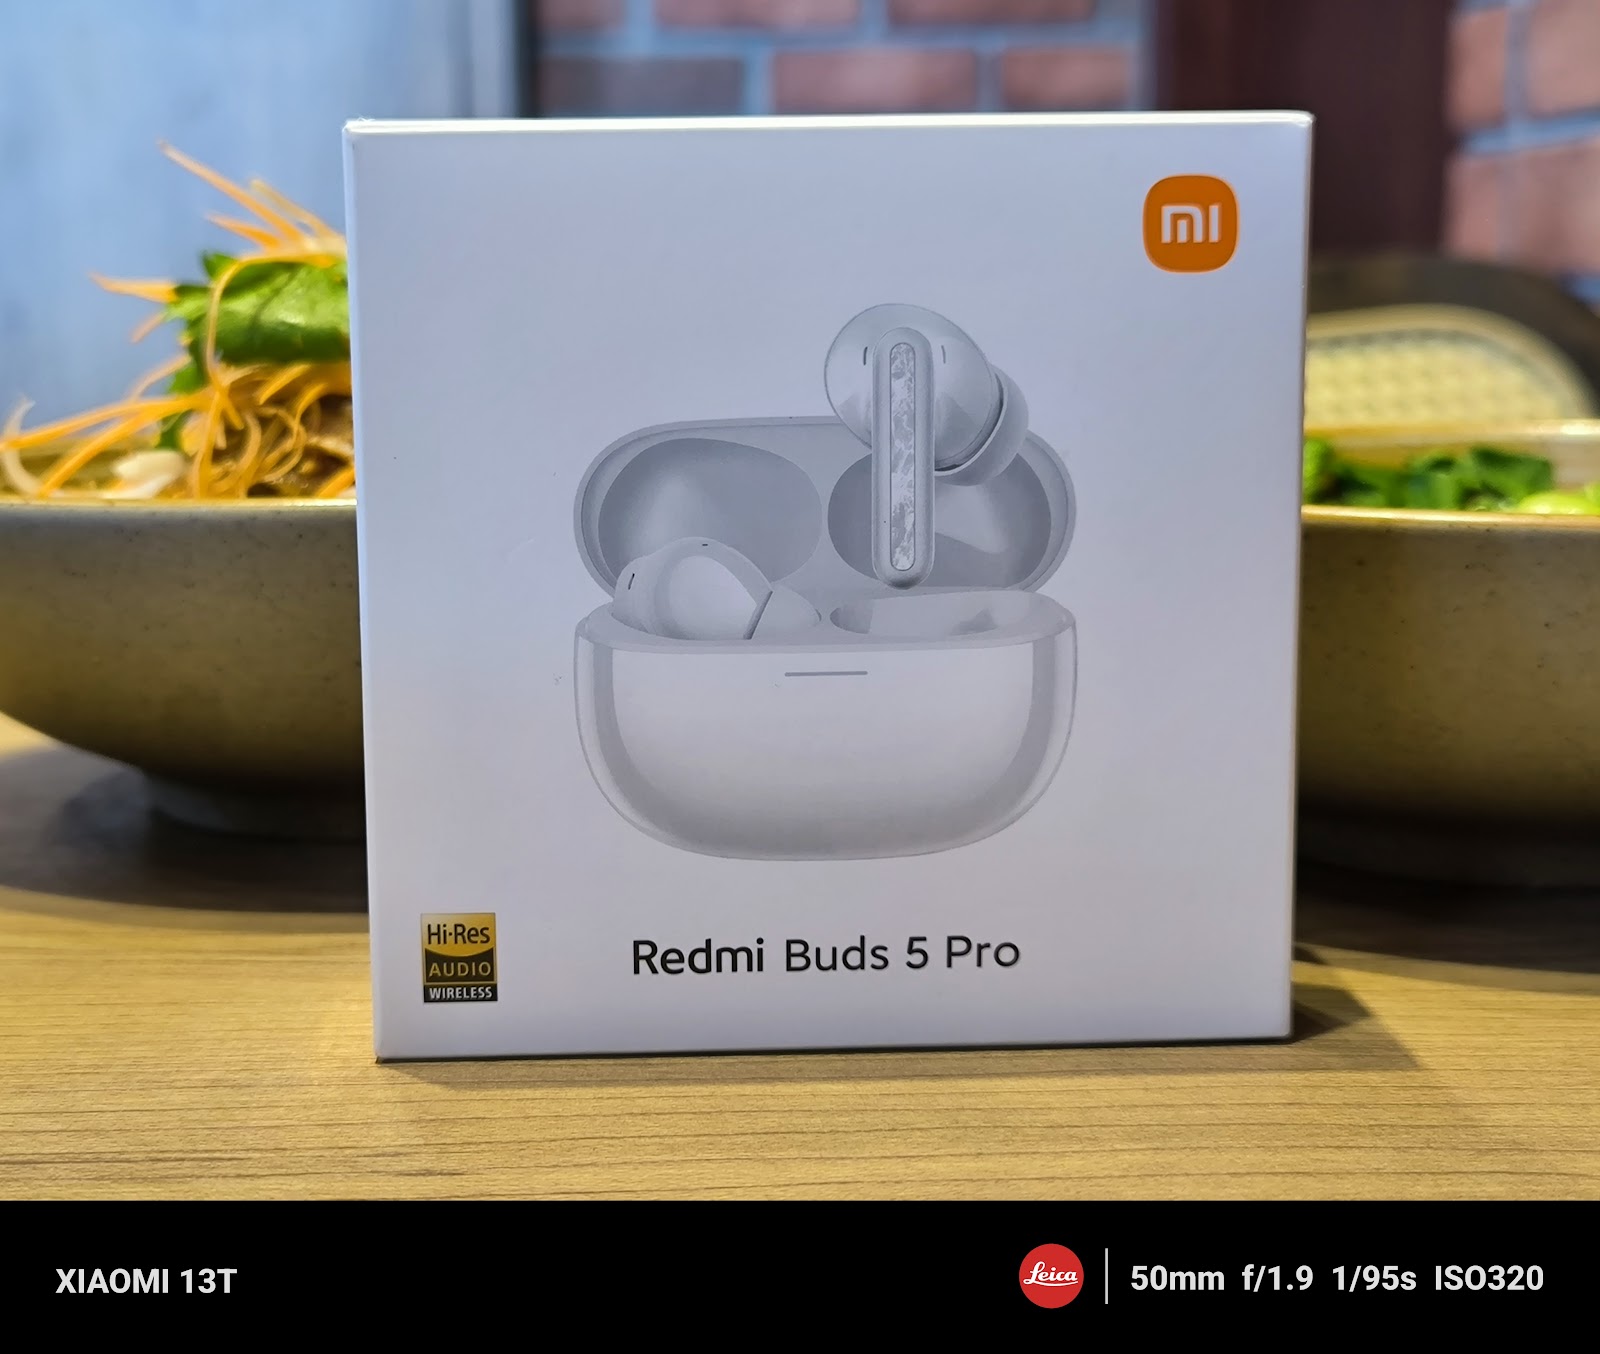 Introducing the Redmi Buds 5 - Experience Unmatched Sound